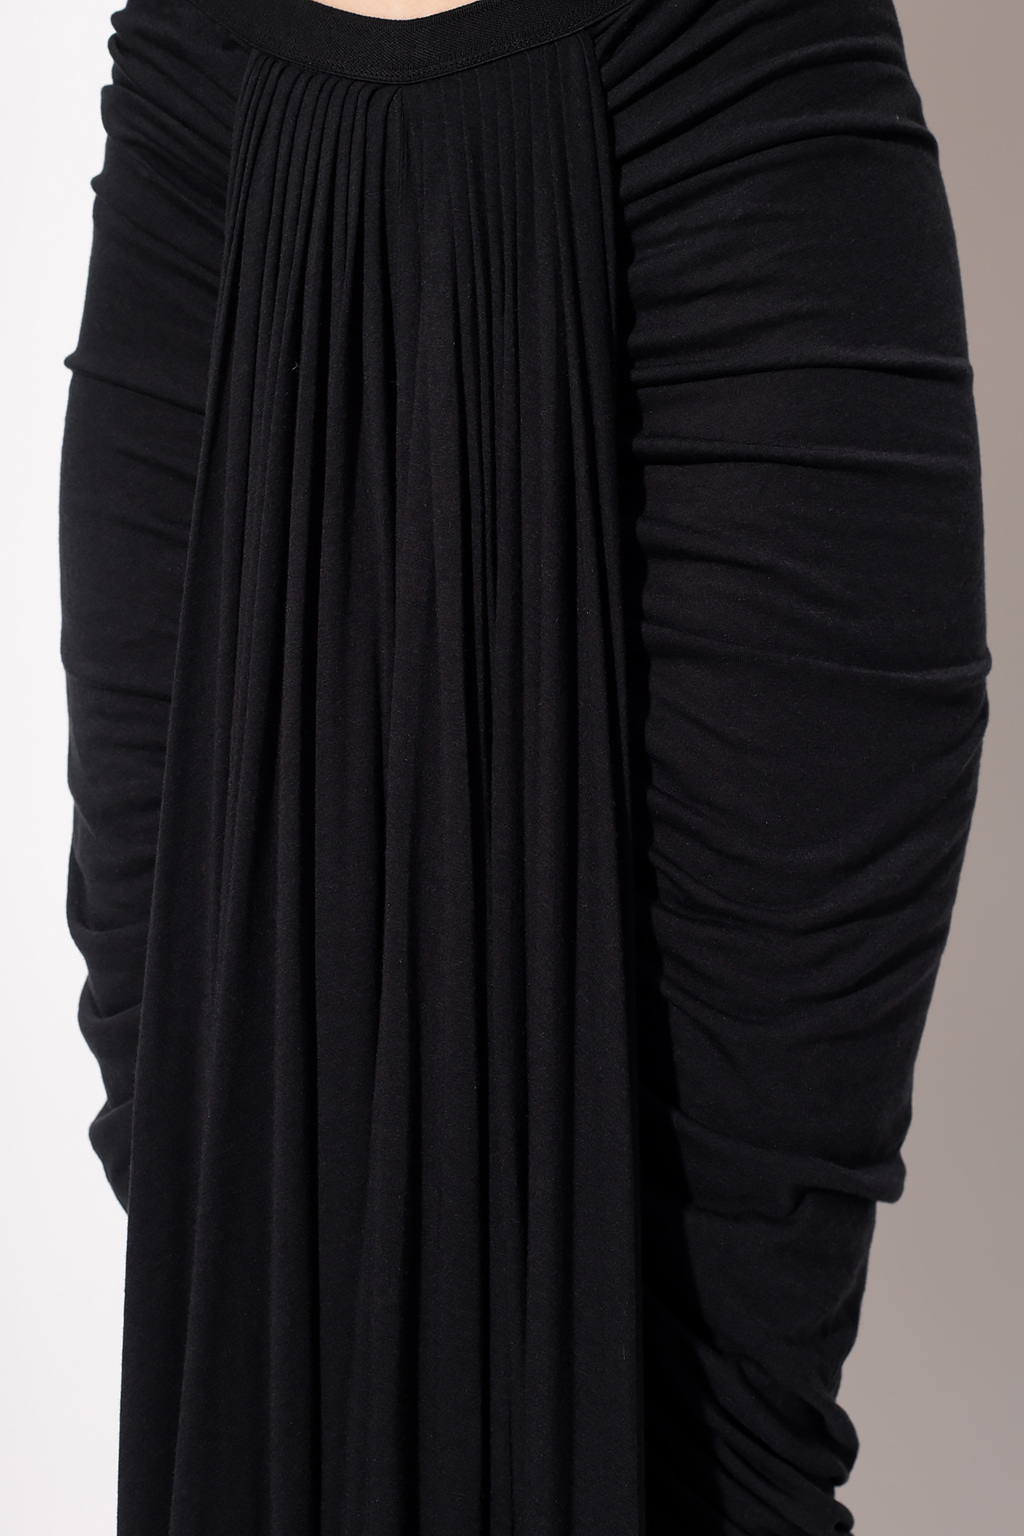 Download the updated version of the app Ruched skirt